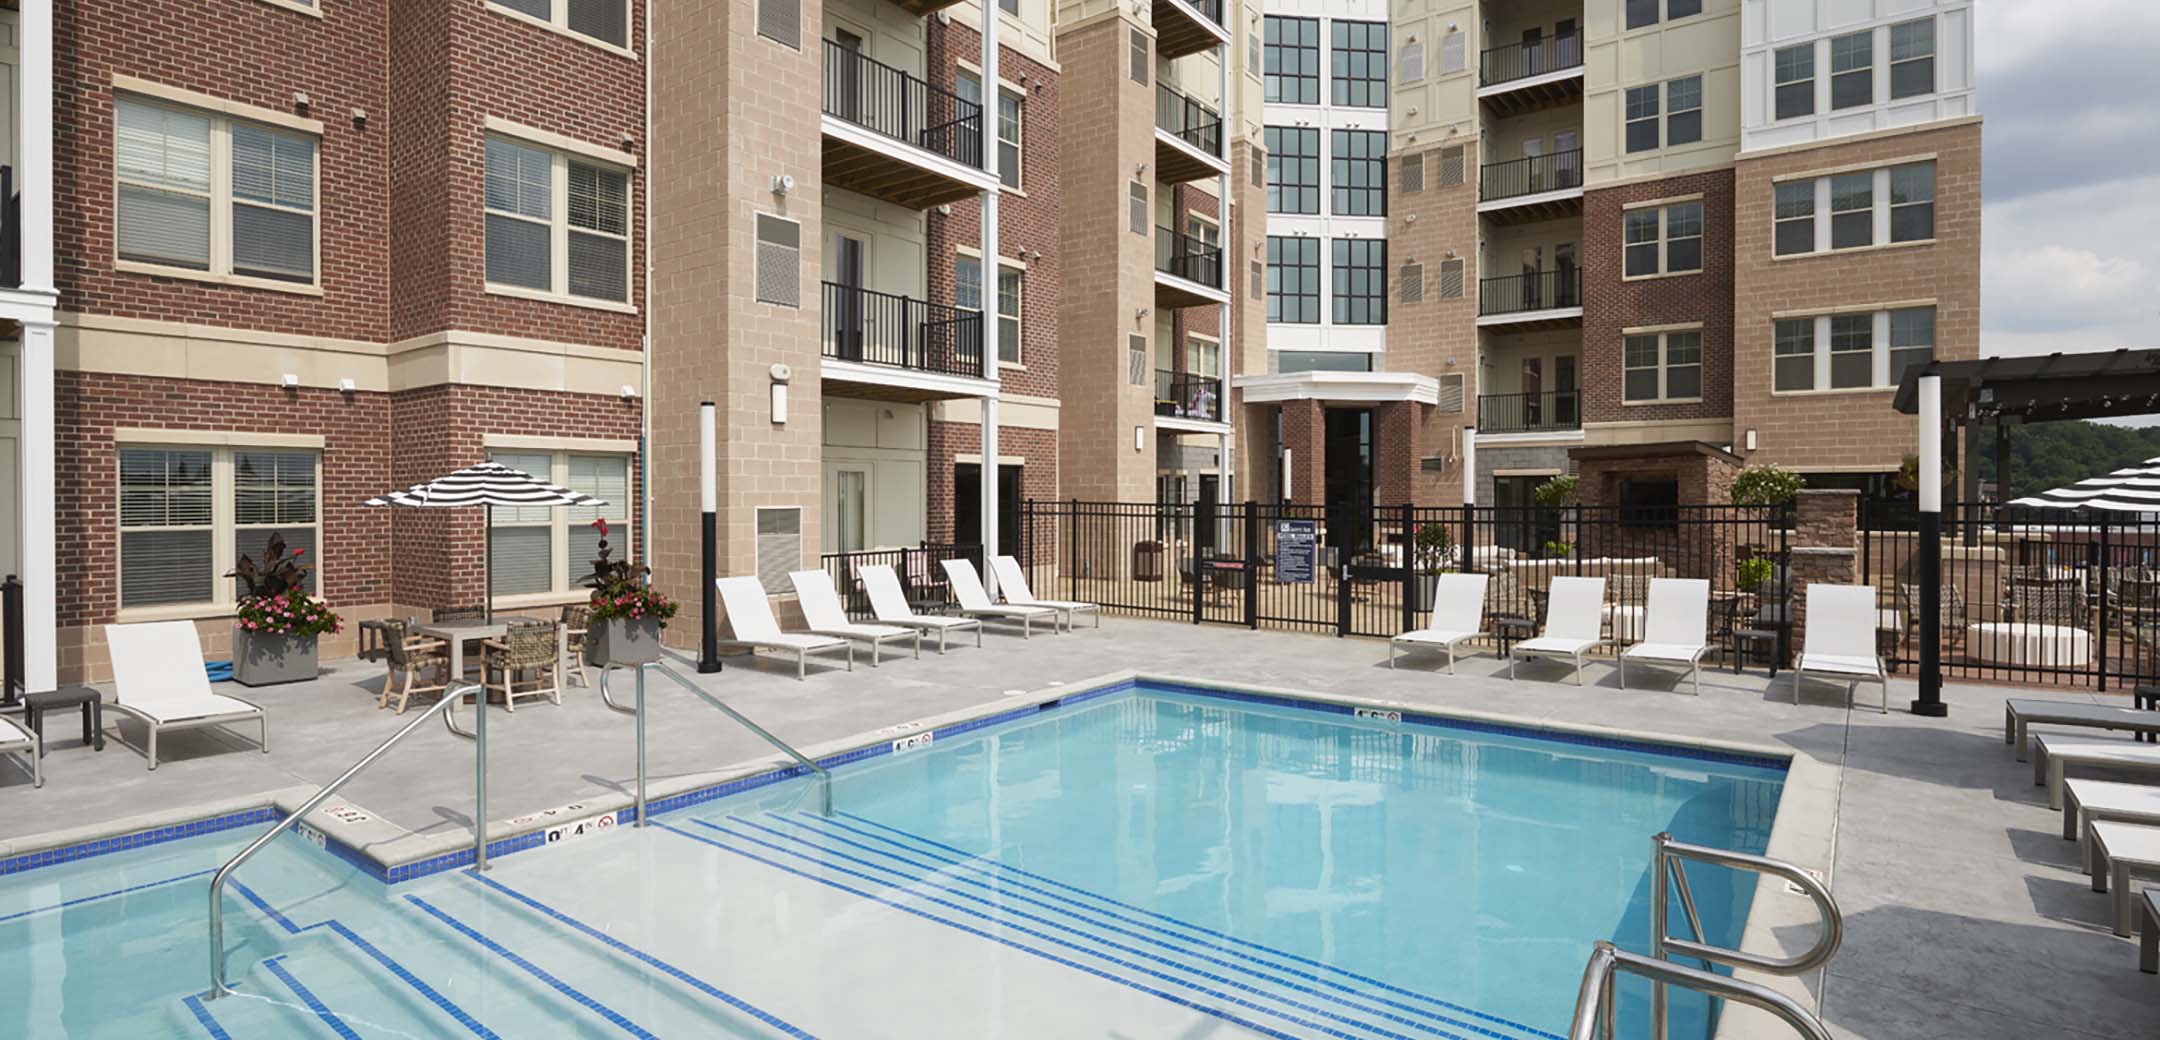 A close up view of the Granite Run Apartment buildings inner courtyard with an outside multi-level pool with seating around it.